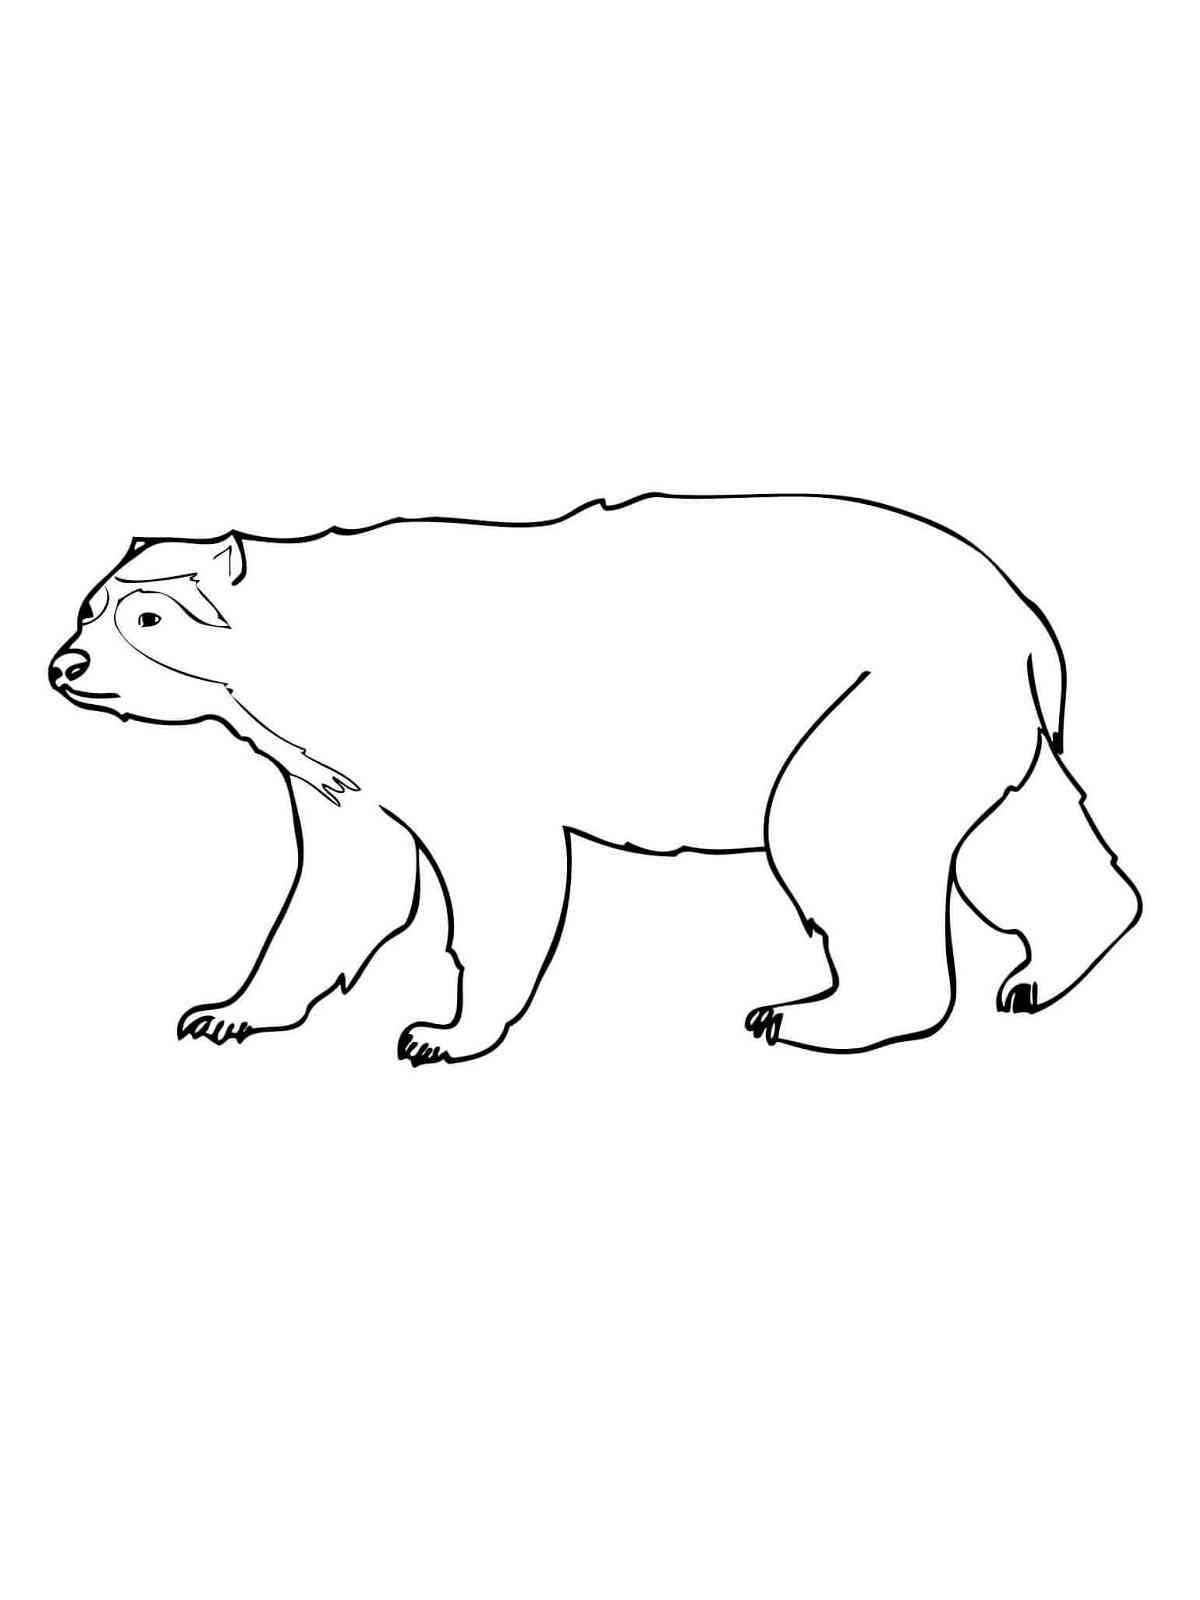 Simple Spectacled Bear coloring page